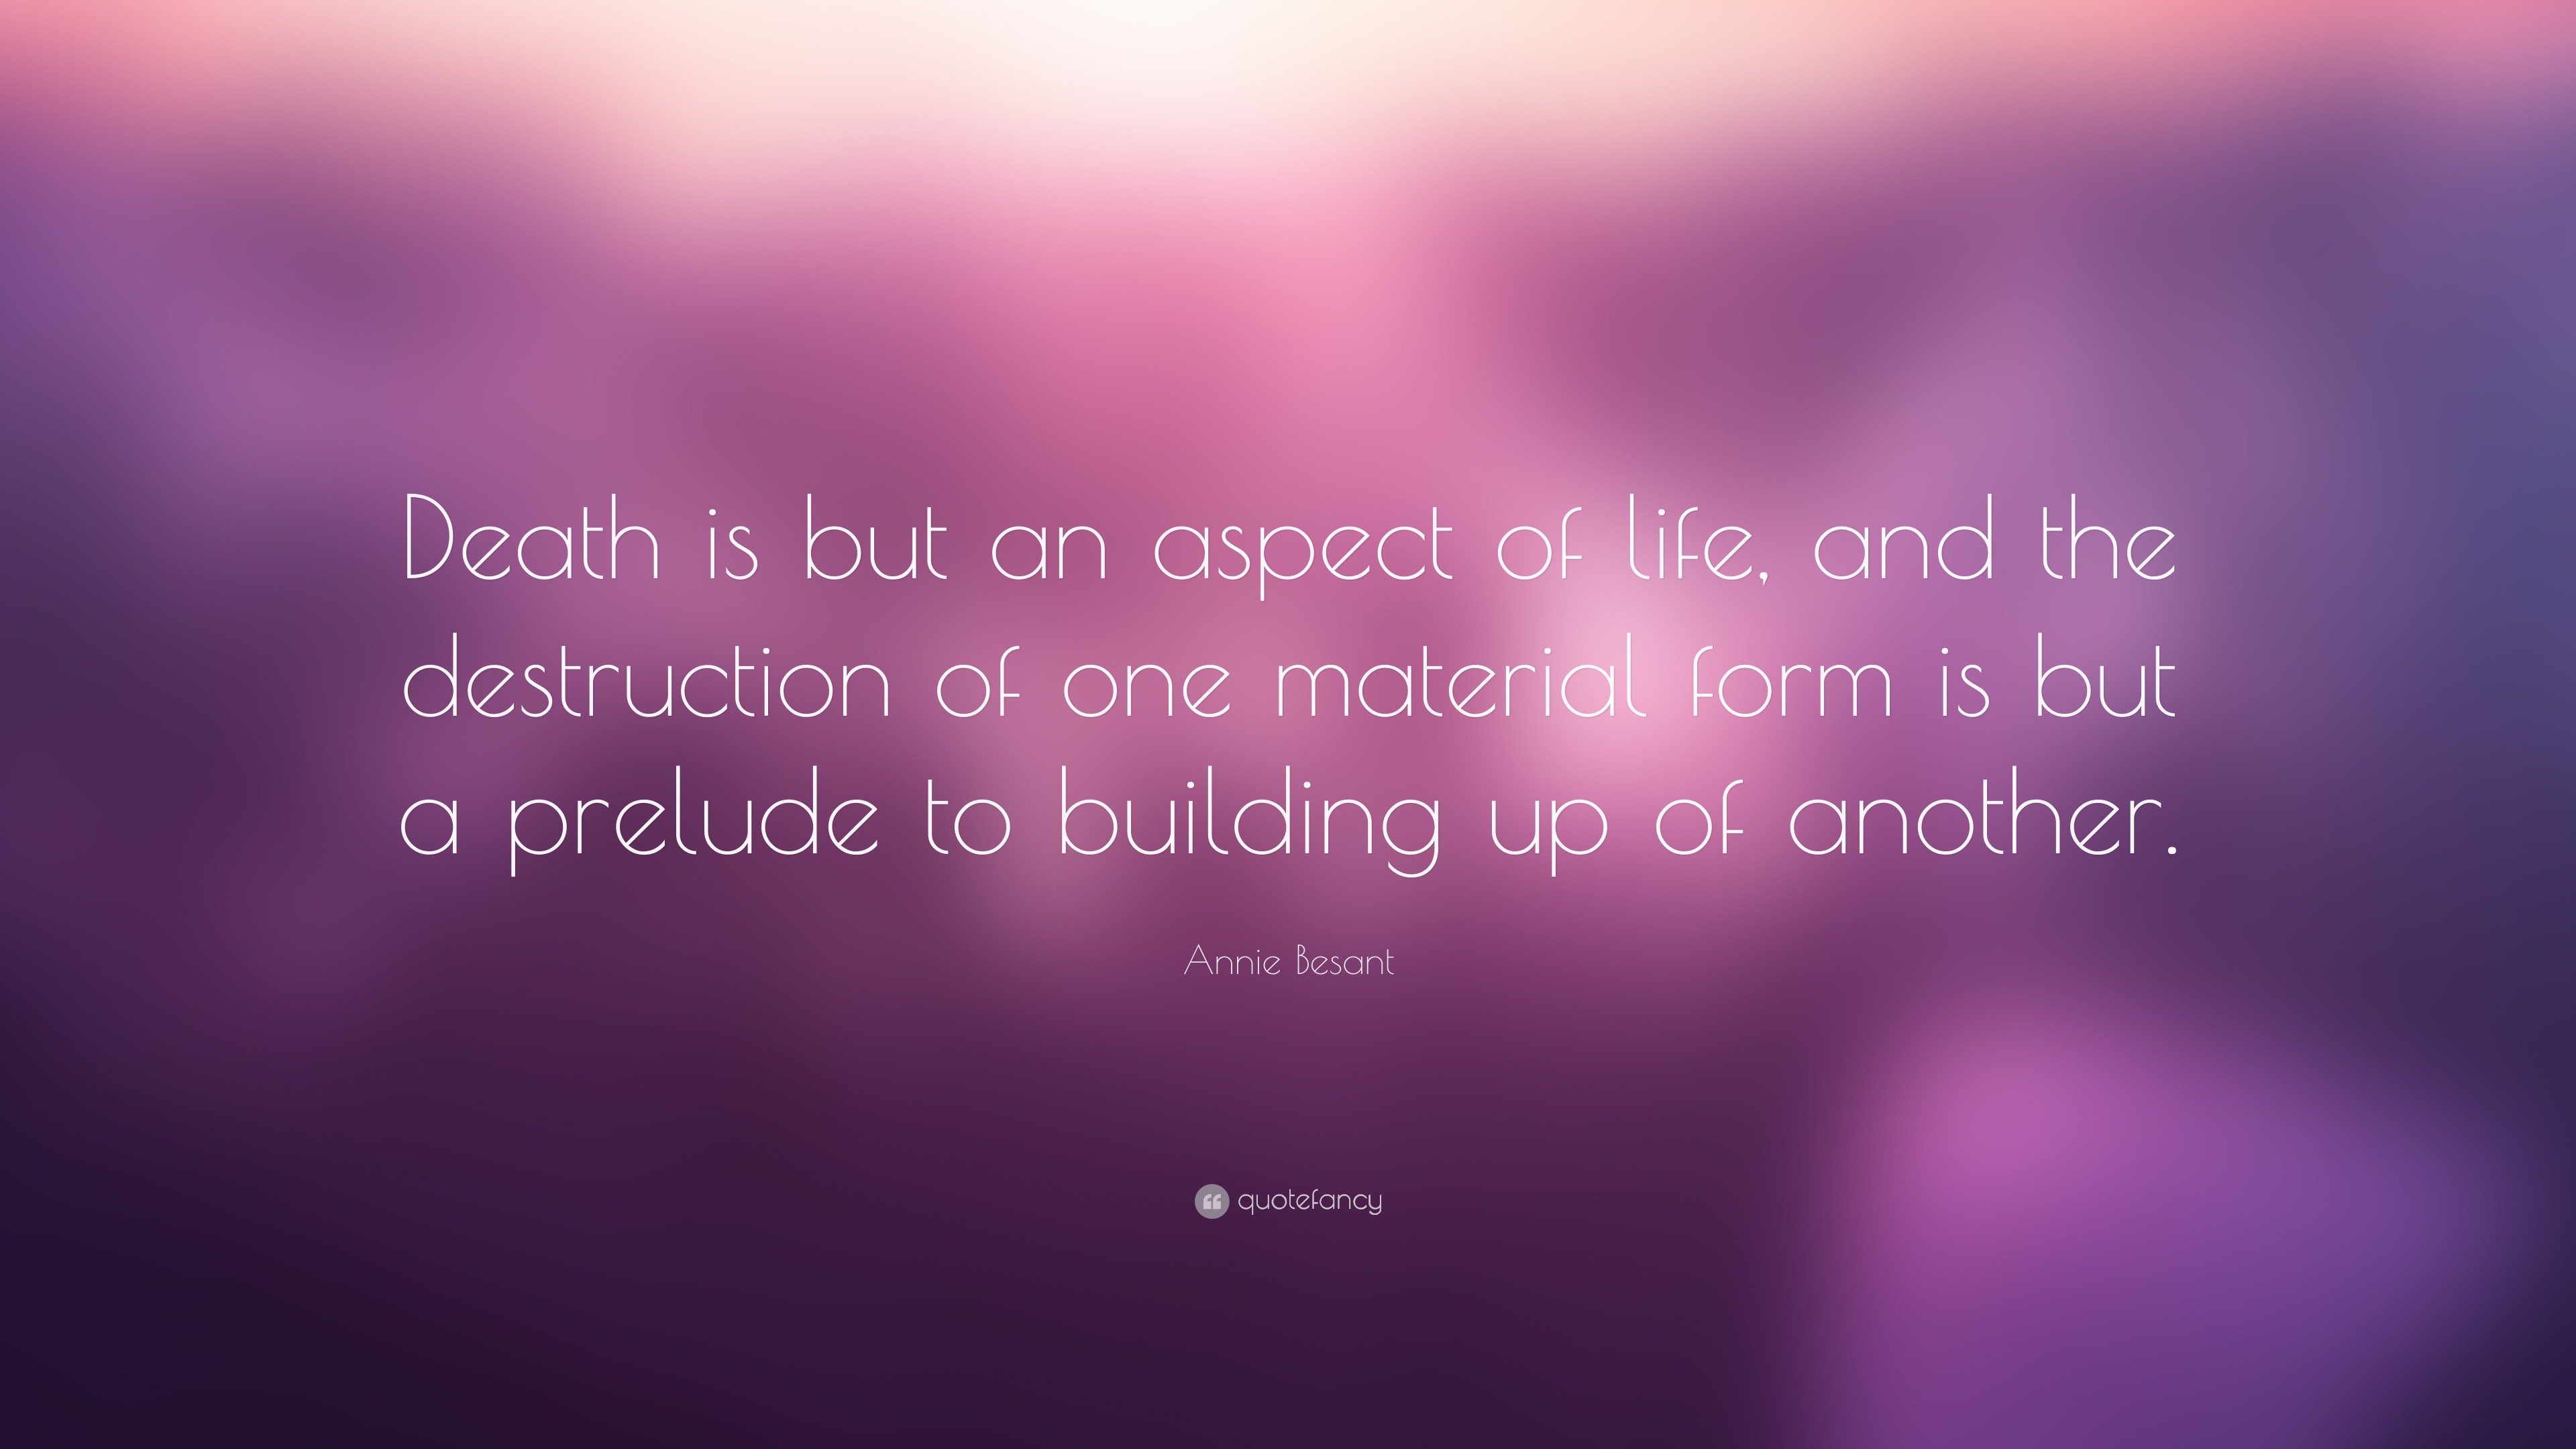 Annie Besant Quote: “Death is but an aspect of life, and the ...